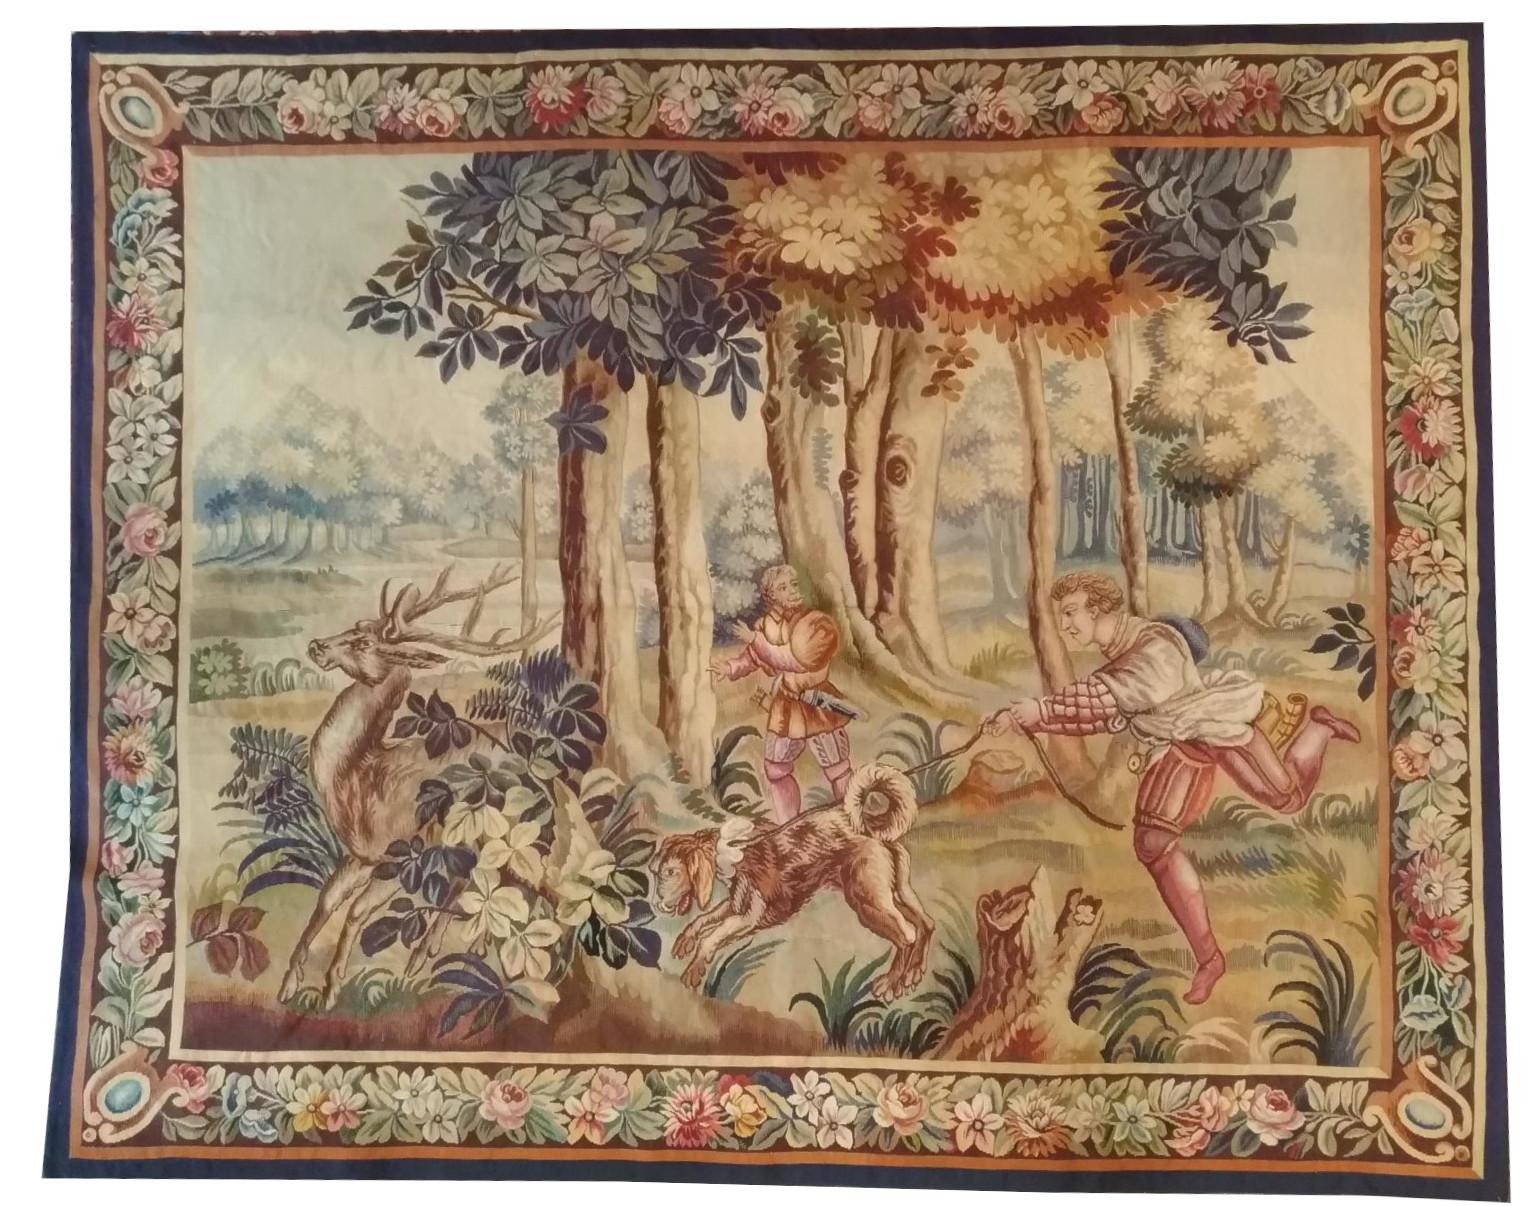 Tapestry 19th century Aubusson stag hunt - n° 1140

Thanks to our Restoration-Conservation workshop and also Our know-how, 
we are pleased to present to you works of art in fabric such as Tapestry, 
Carpets and Textiles in very good conservation